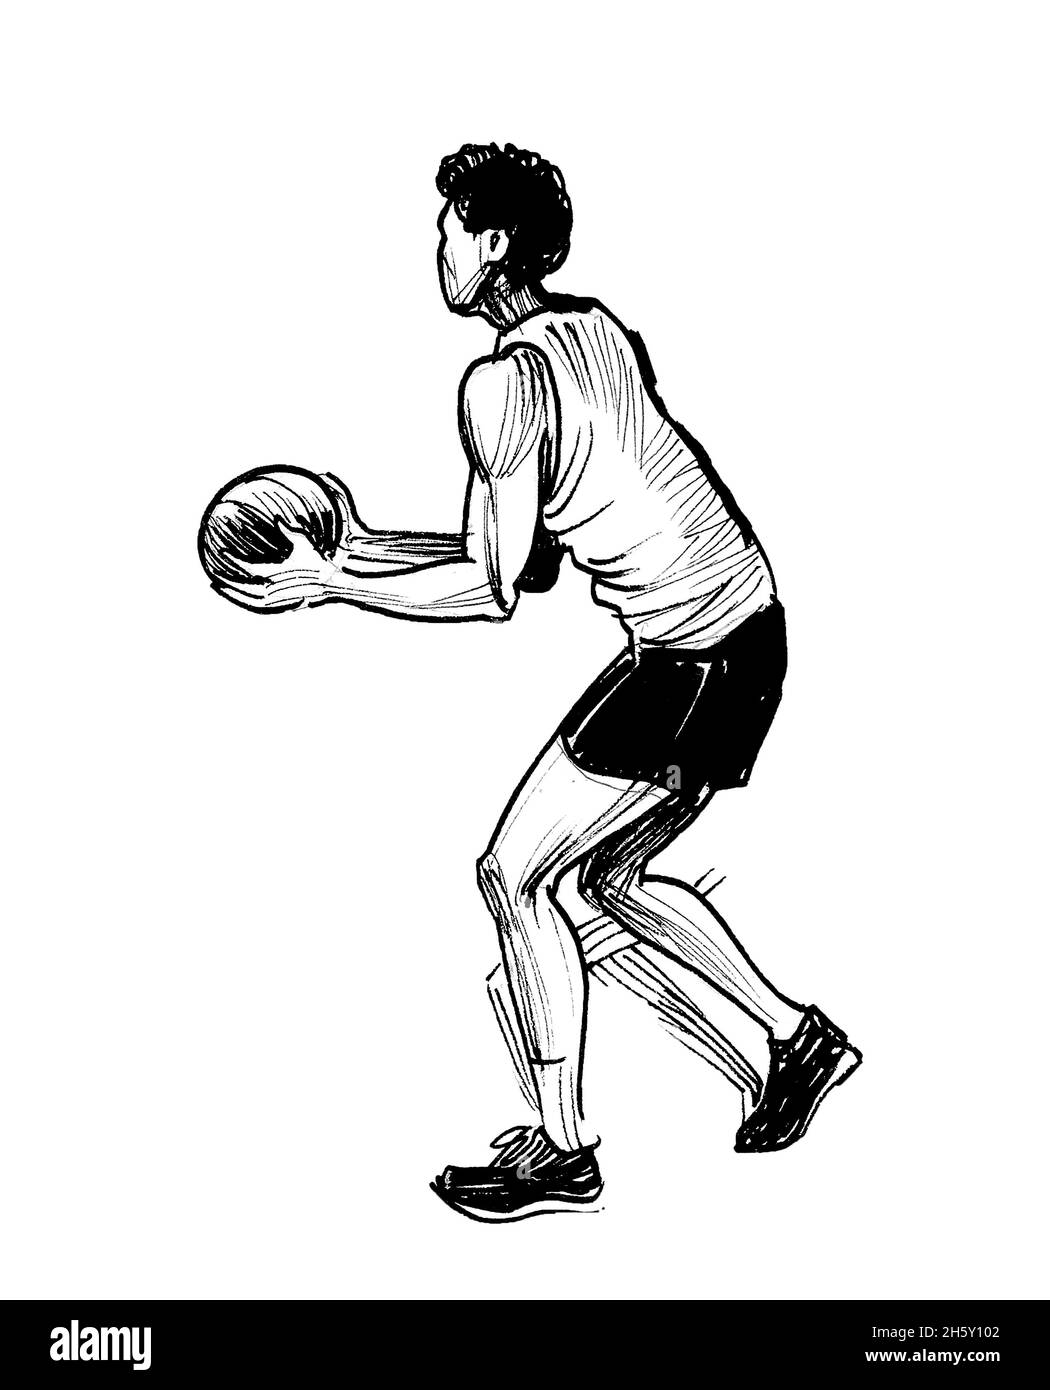 Basketball player. Ink black and white drawing Stock Photo - Alamy